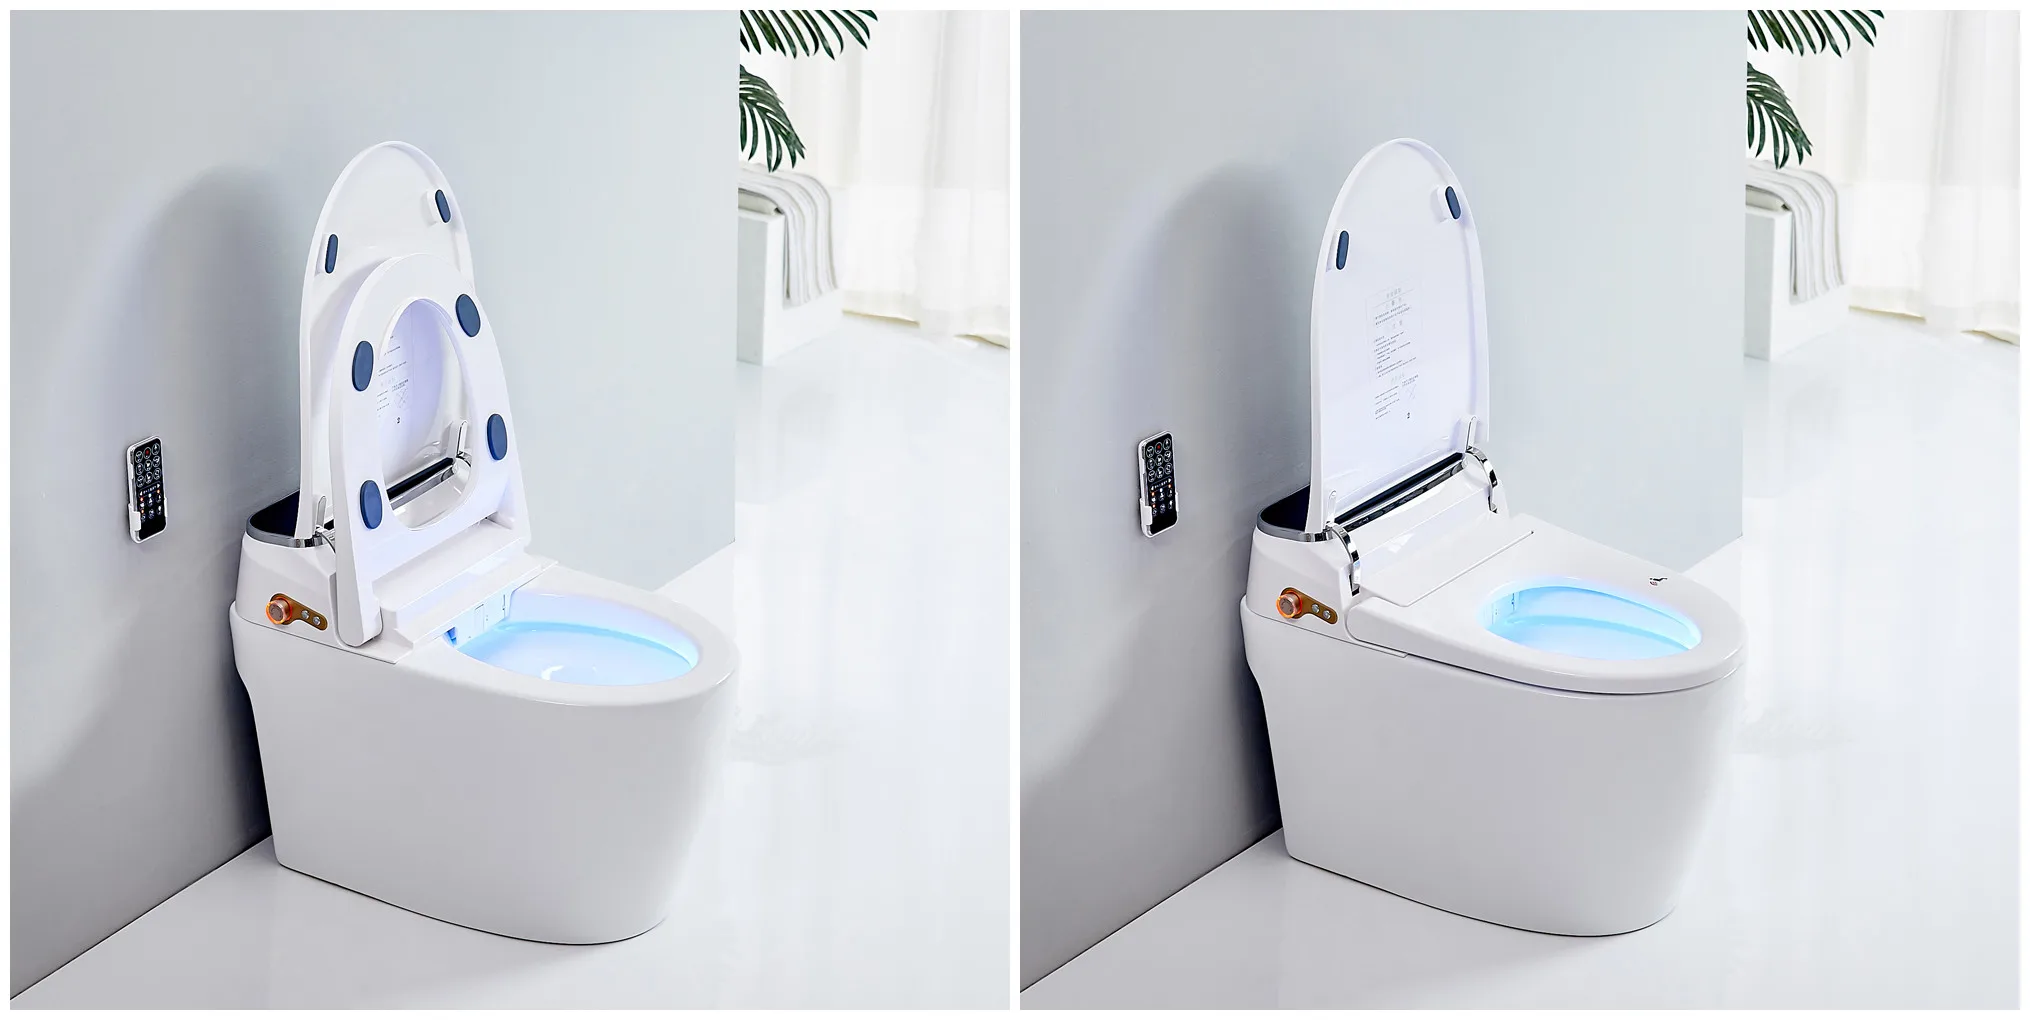 Auto Washing Cleaning Function Electronic Smart commode Intelligent toilet with Controller Floor Mounted